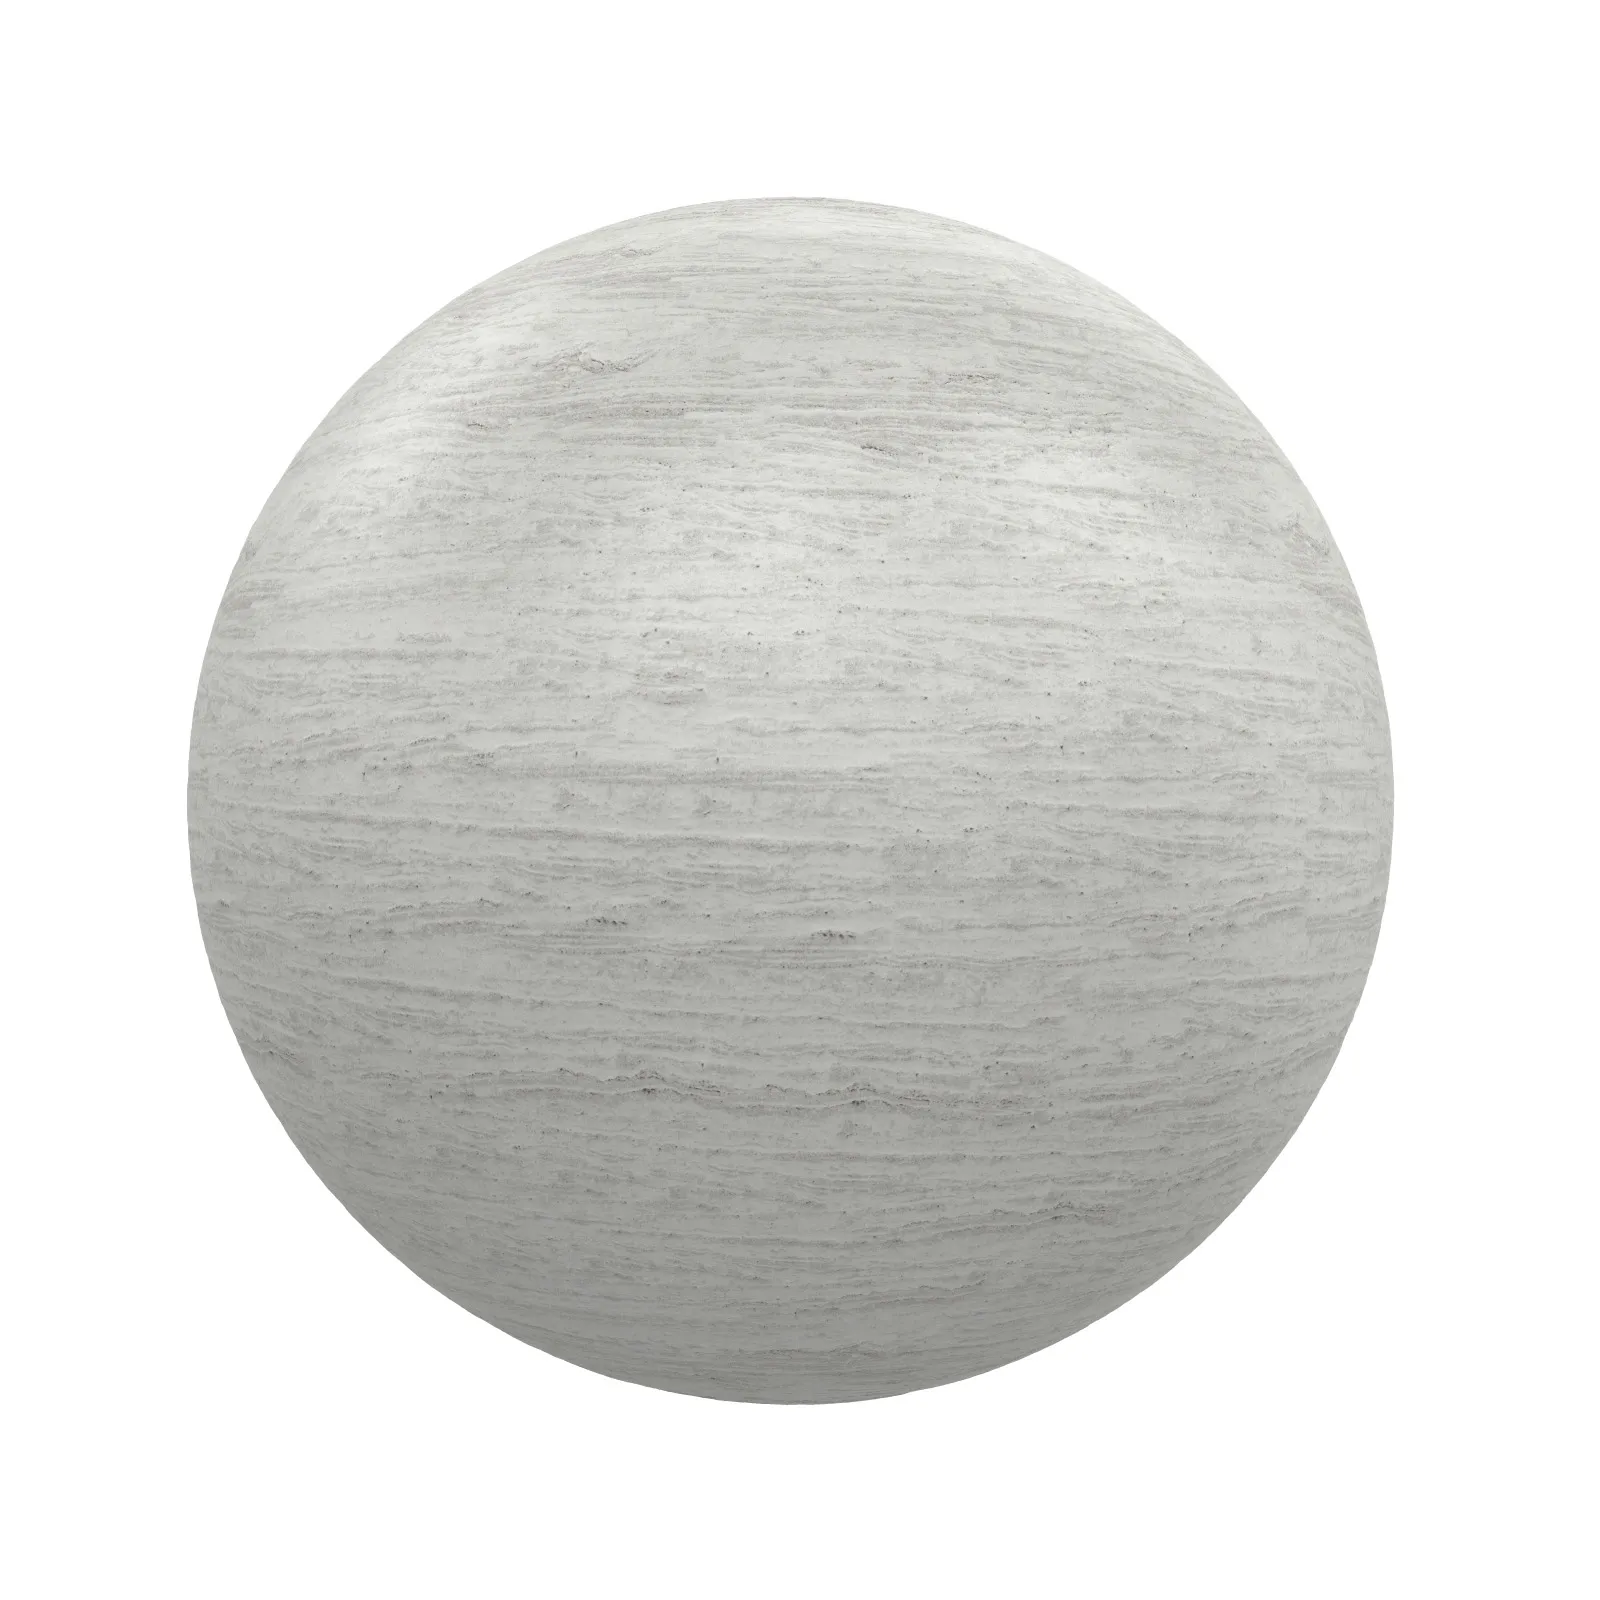 TEXTURES – STONES – CGAxis PBR Colection Vol 1 Stones – rough marble